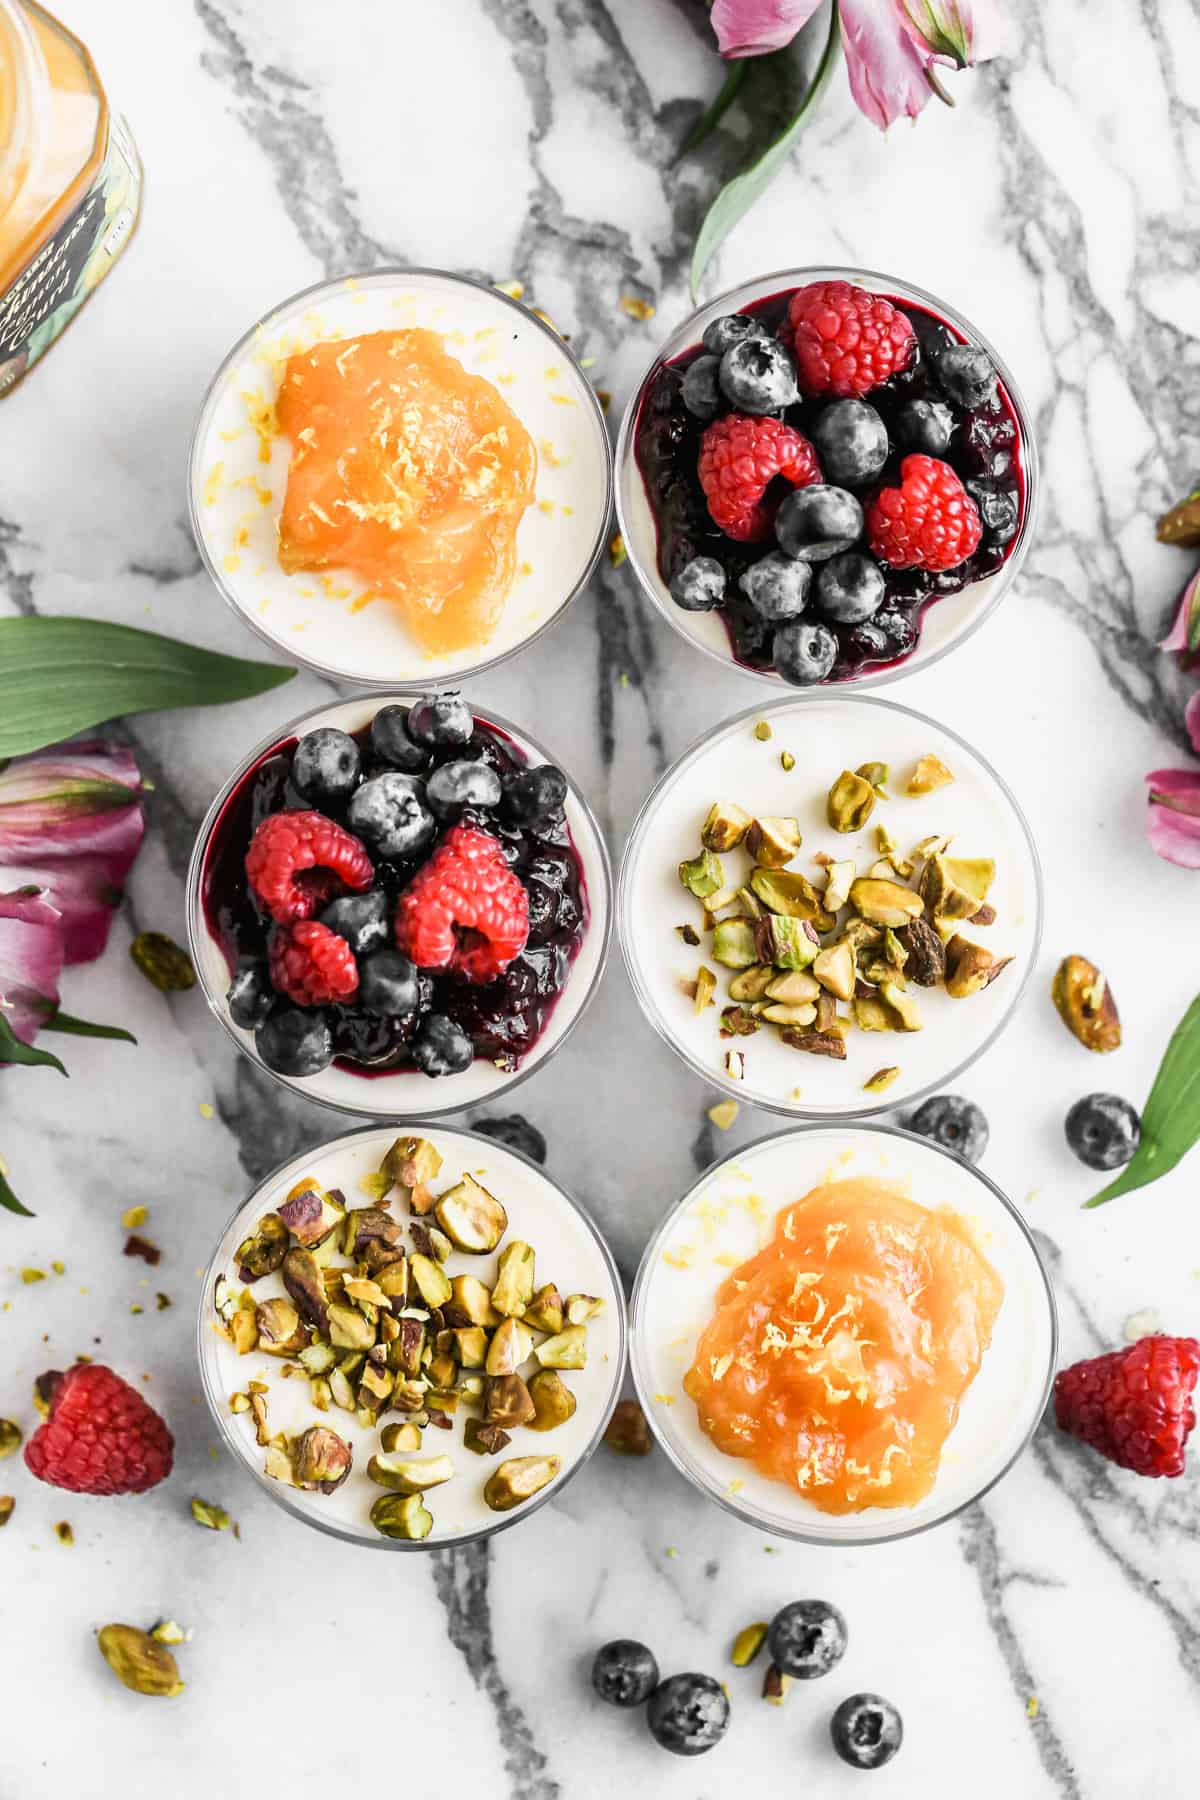 Six homemade Panna Cotta cups with a varitety of toppings including: berry sauce with fresh berries, chopped nuts, and a mango topping.